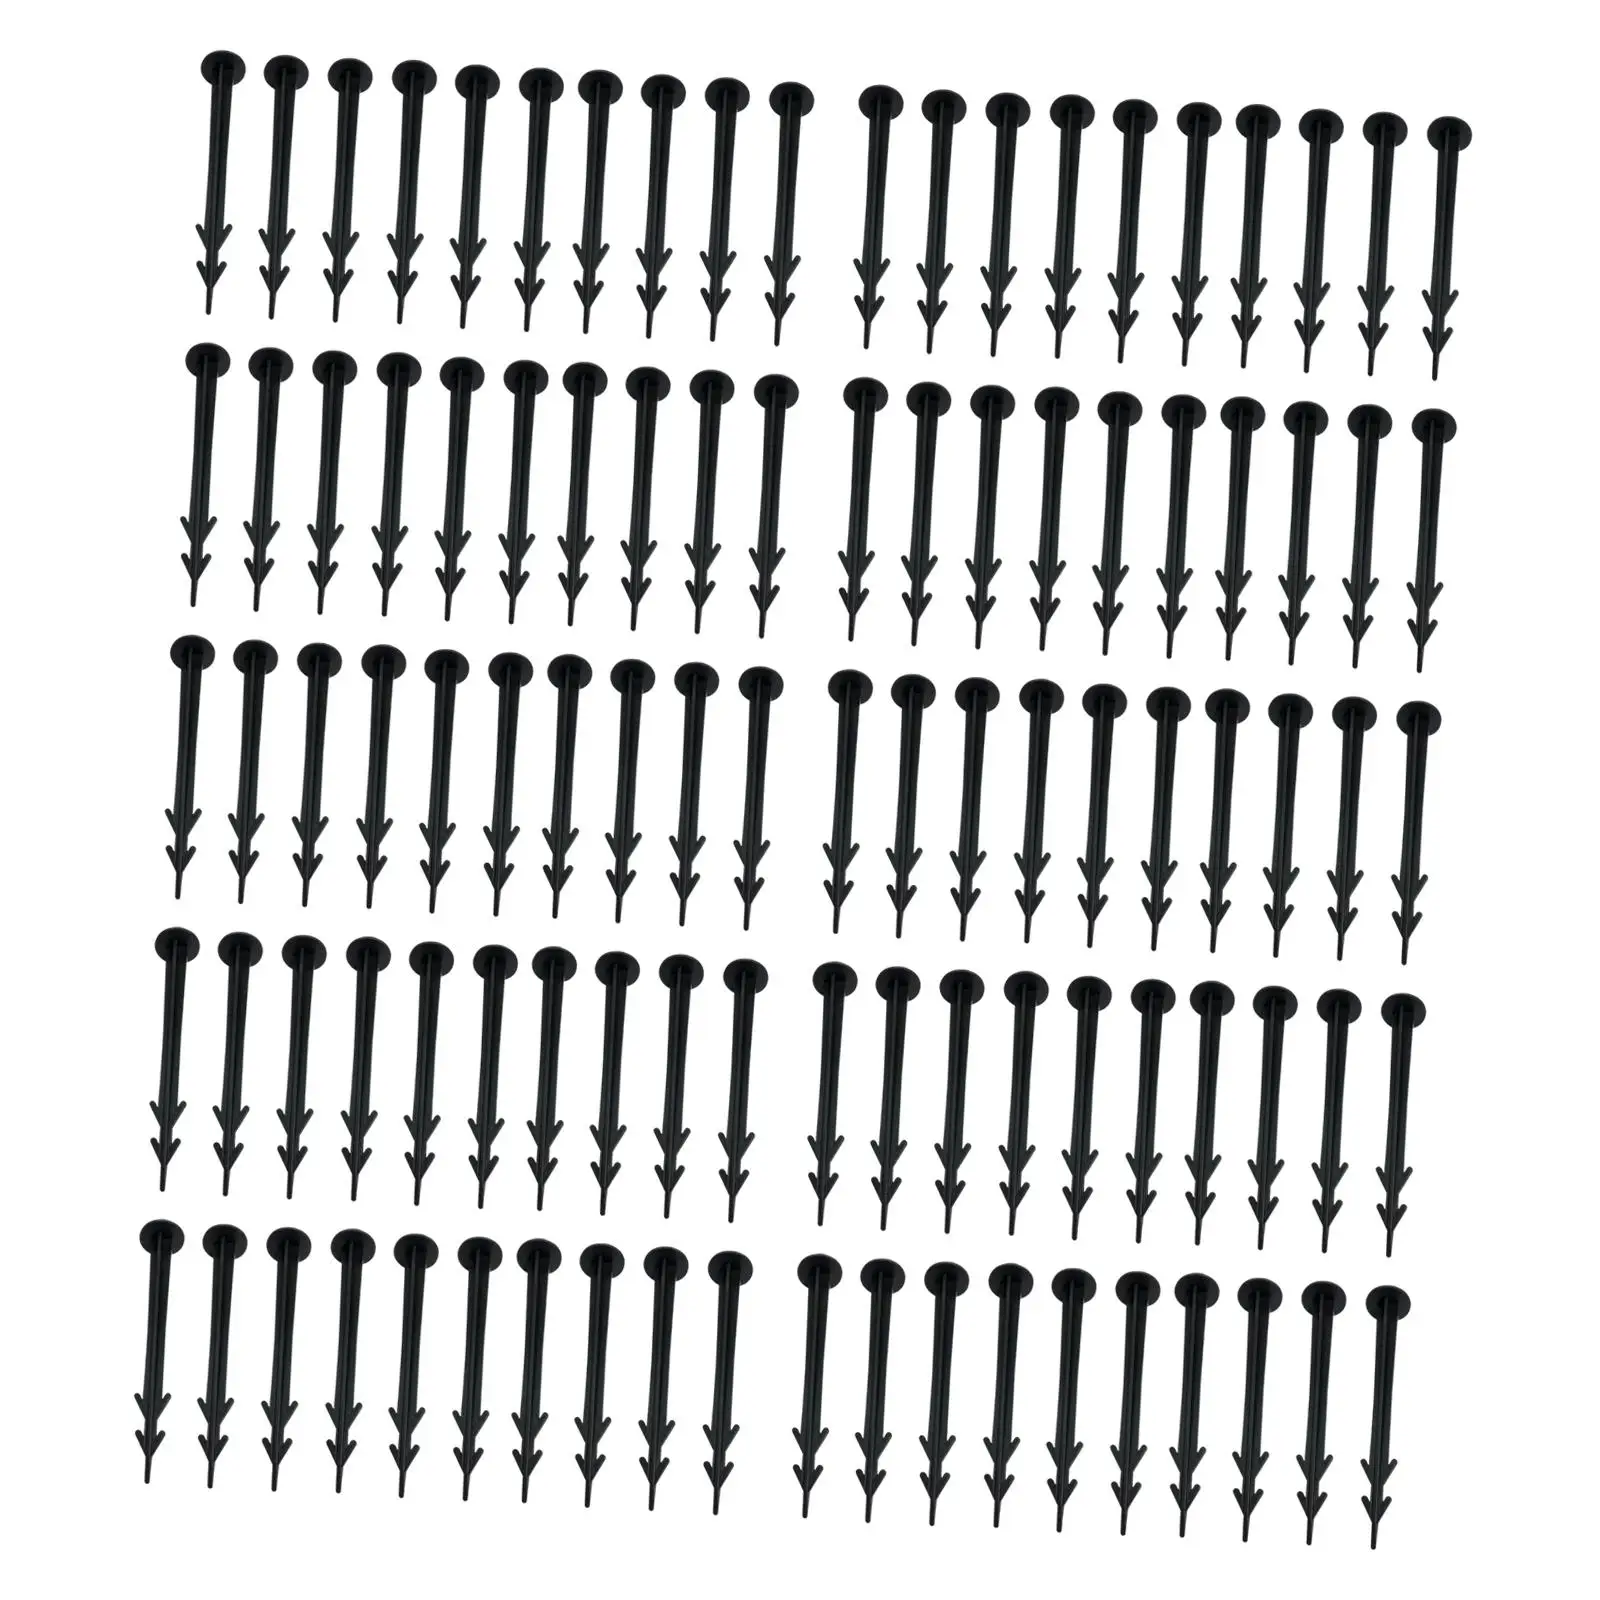 100Pcs Garden Stakes Yard Tents Edging Nails Anchor Fixing Anchor Pegs for Landscape Fabric Lawn Edging Holding Down Tents